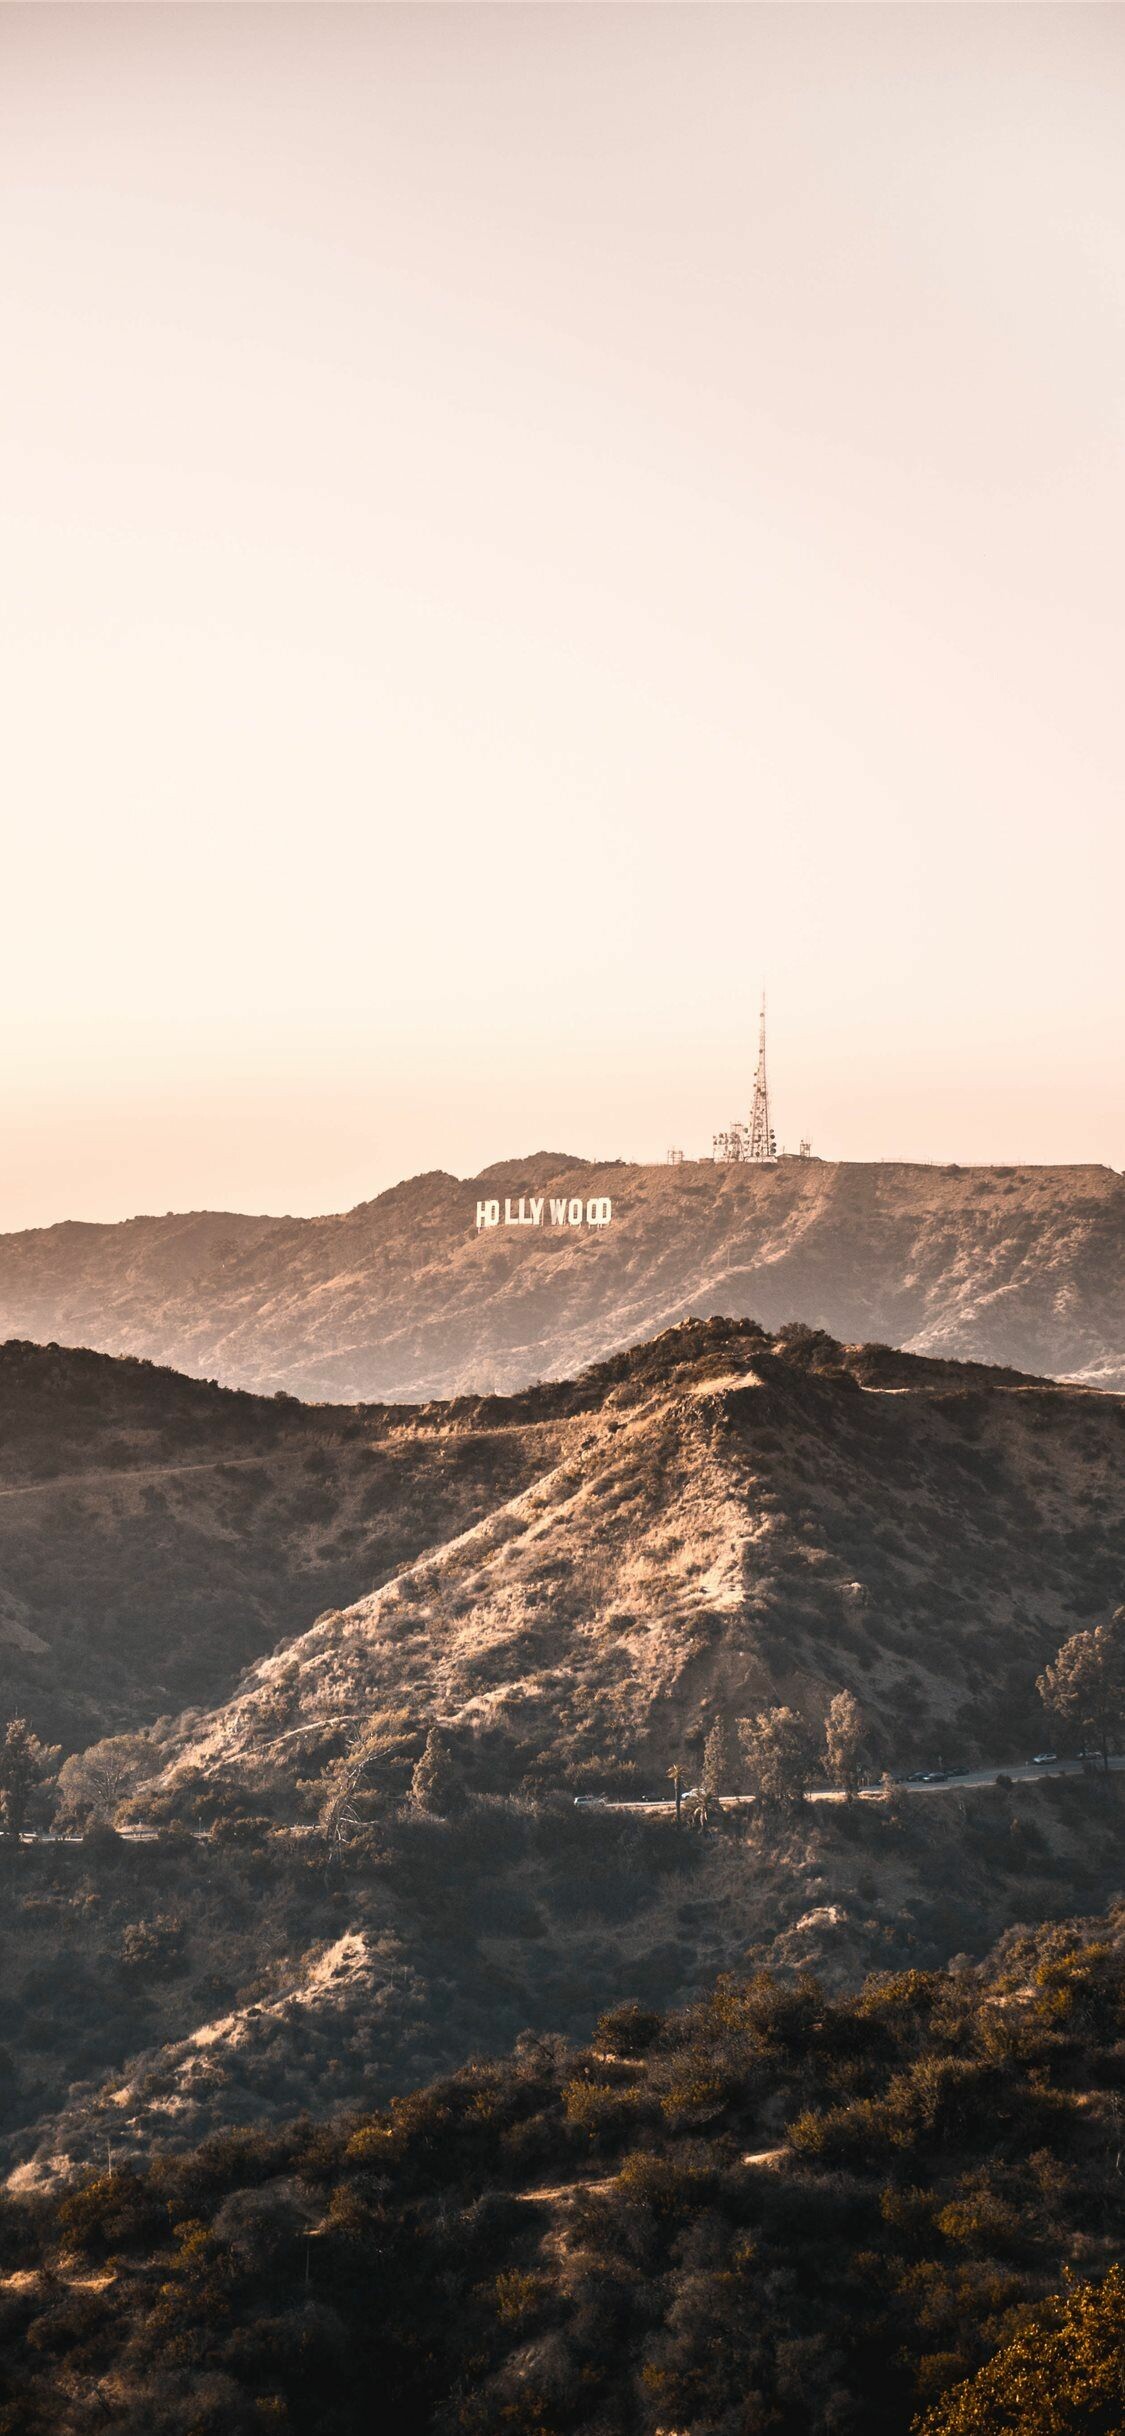 Hollywood Sign: The landmark was erected in 1923 and originally read “HOLLYWOODLAND”. 1130x2440 HD Wallpaper.